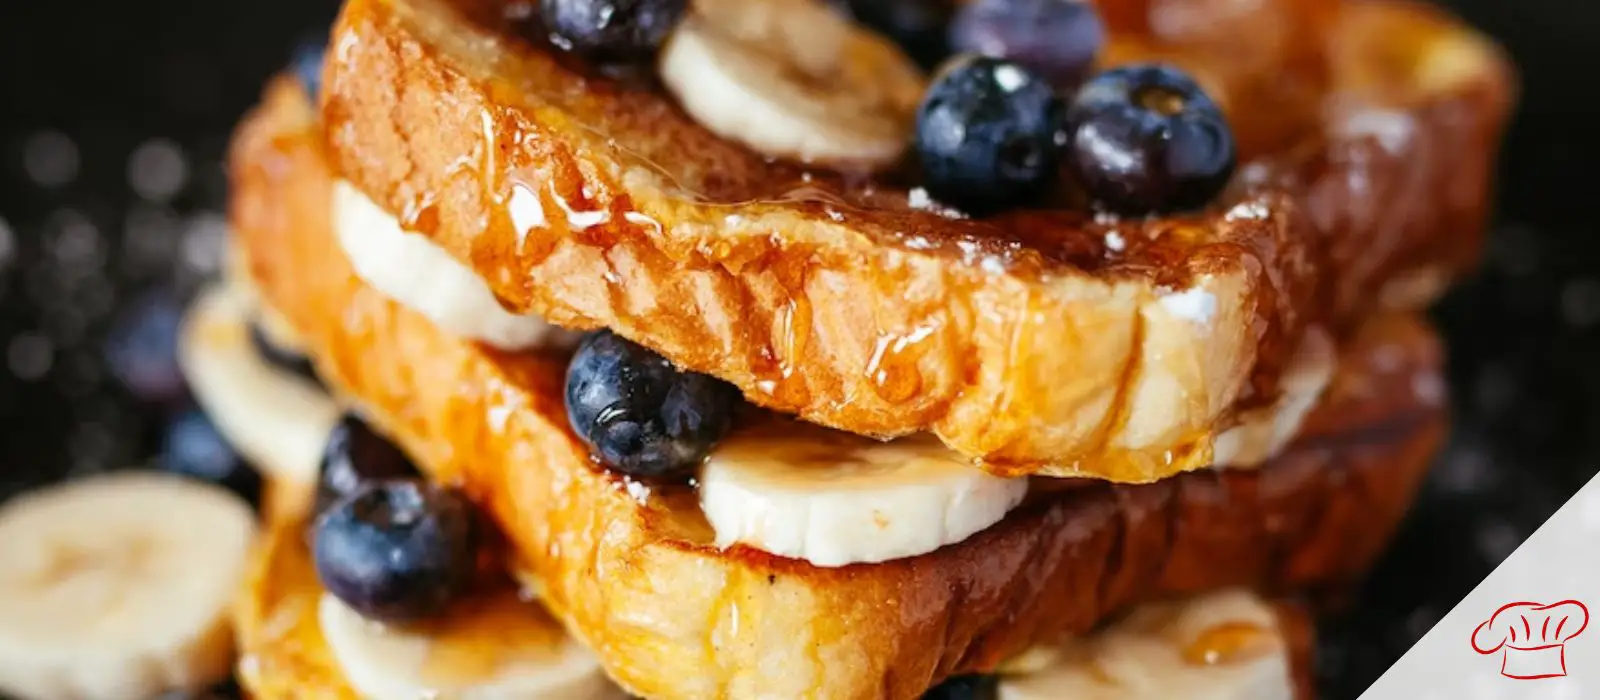 What To Do With Leftover French Toast Batter